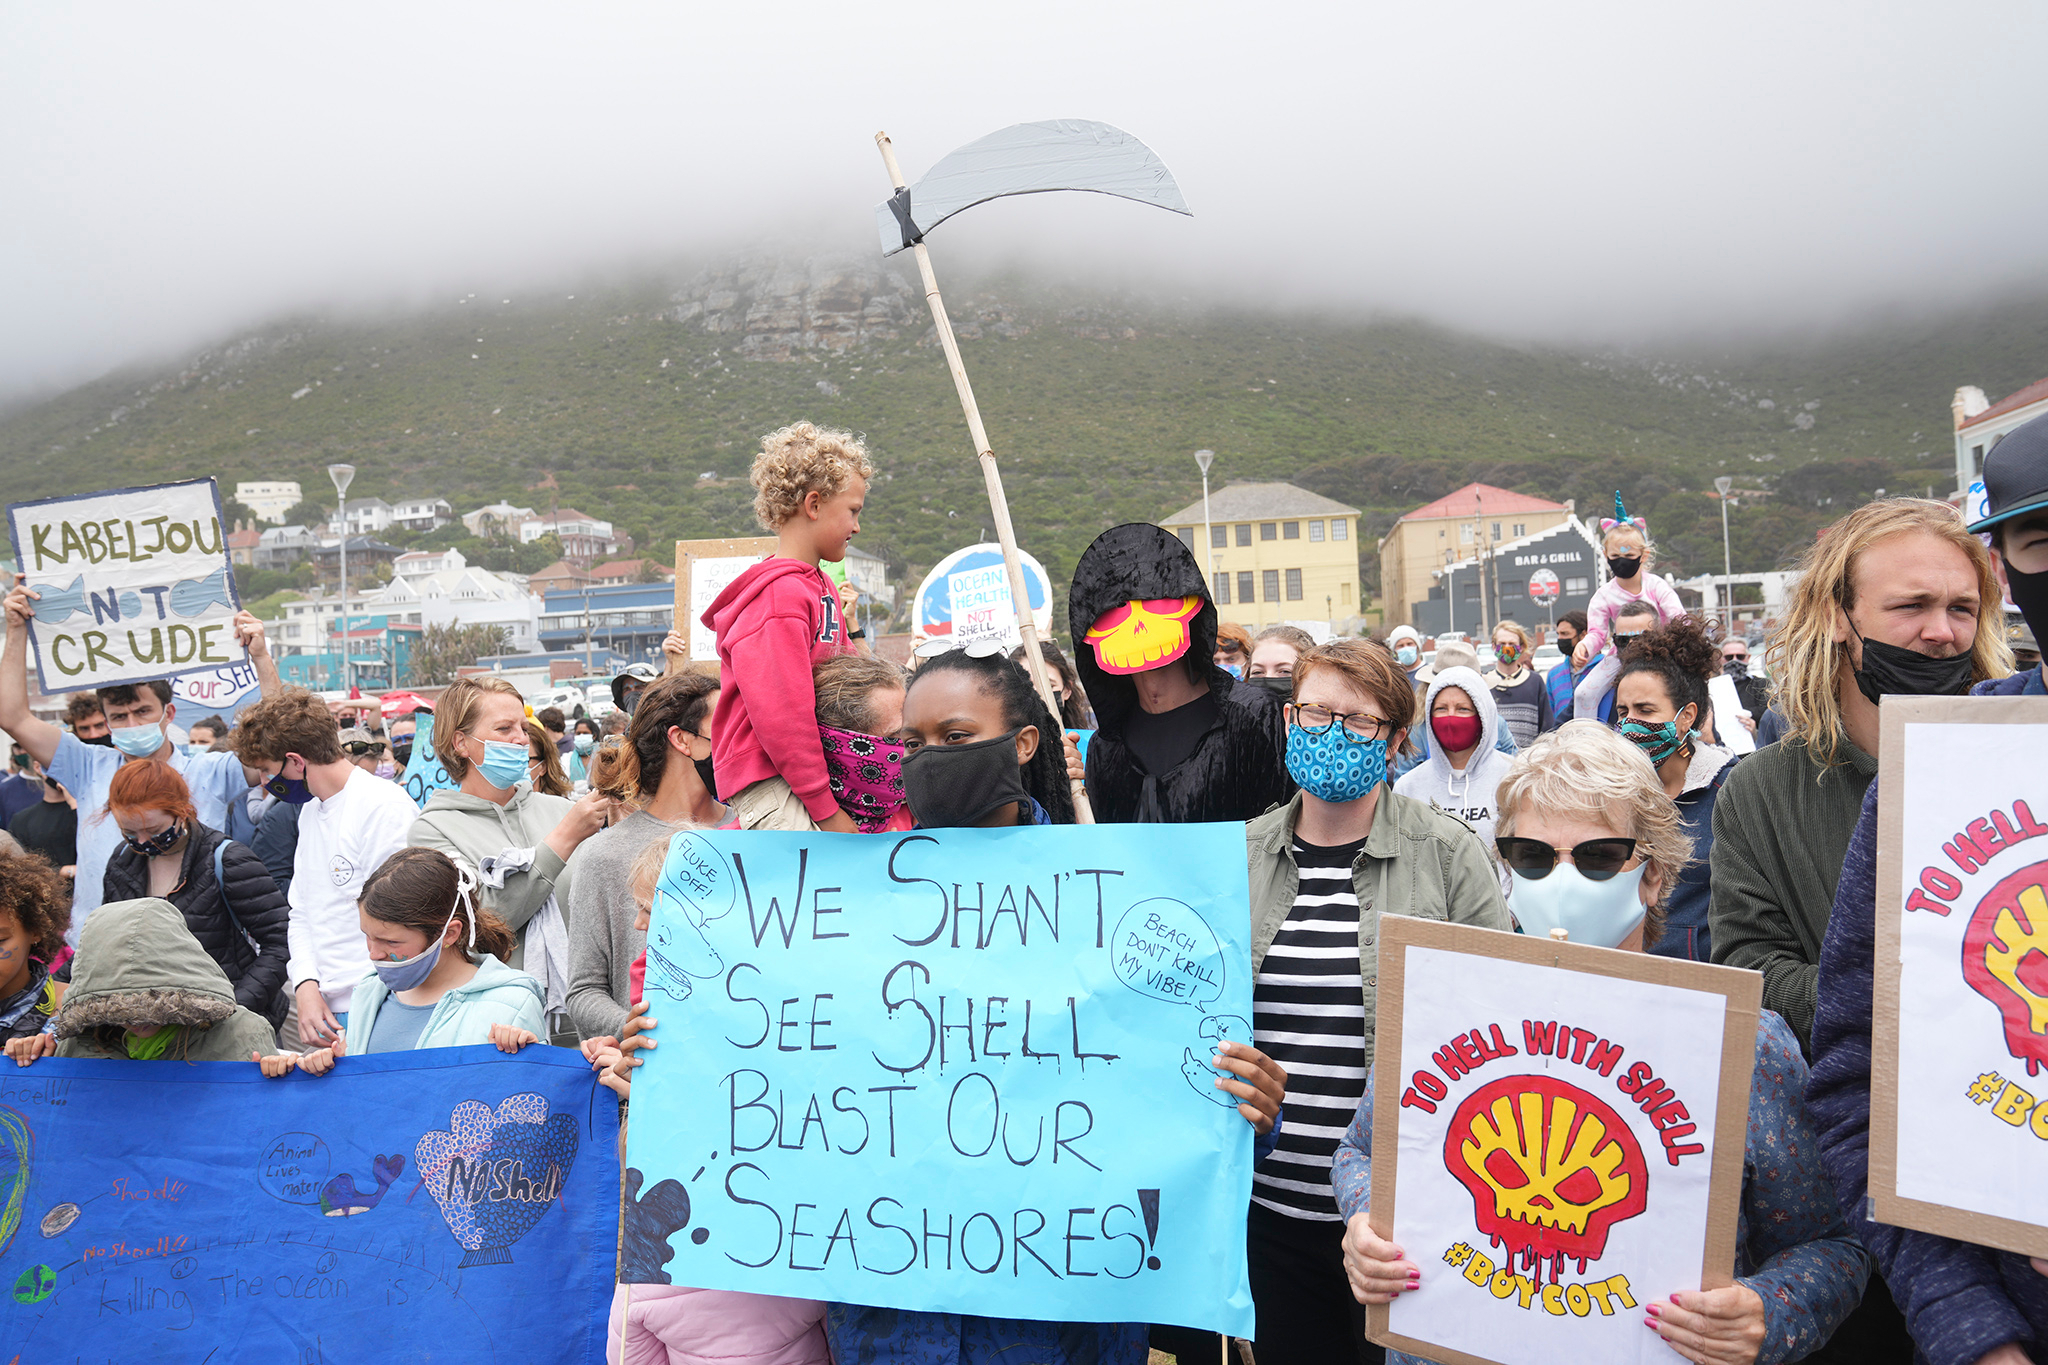 A crowd of protestors hold up signs criticising Shell. One at the front reads 'We shan't see Shell blast our seashore'. Another protestor is dressed as the Grim Reaper, with a black cape and Scythe, plus a Shell logo over their face.